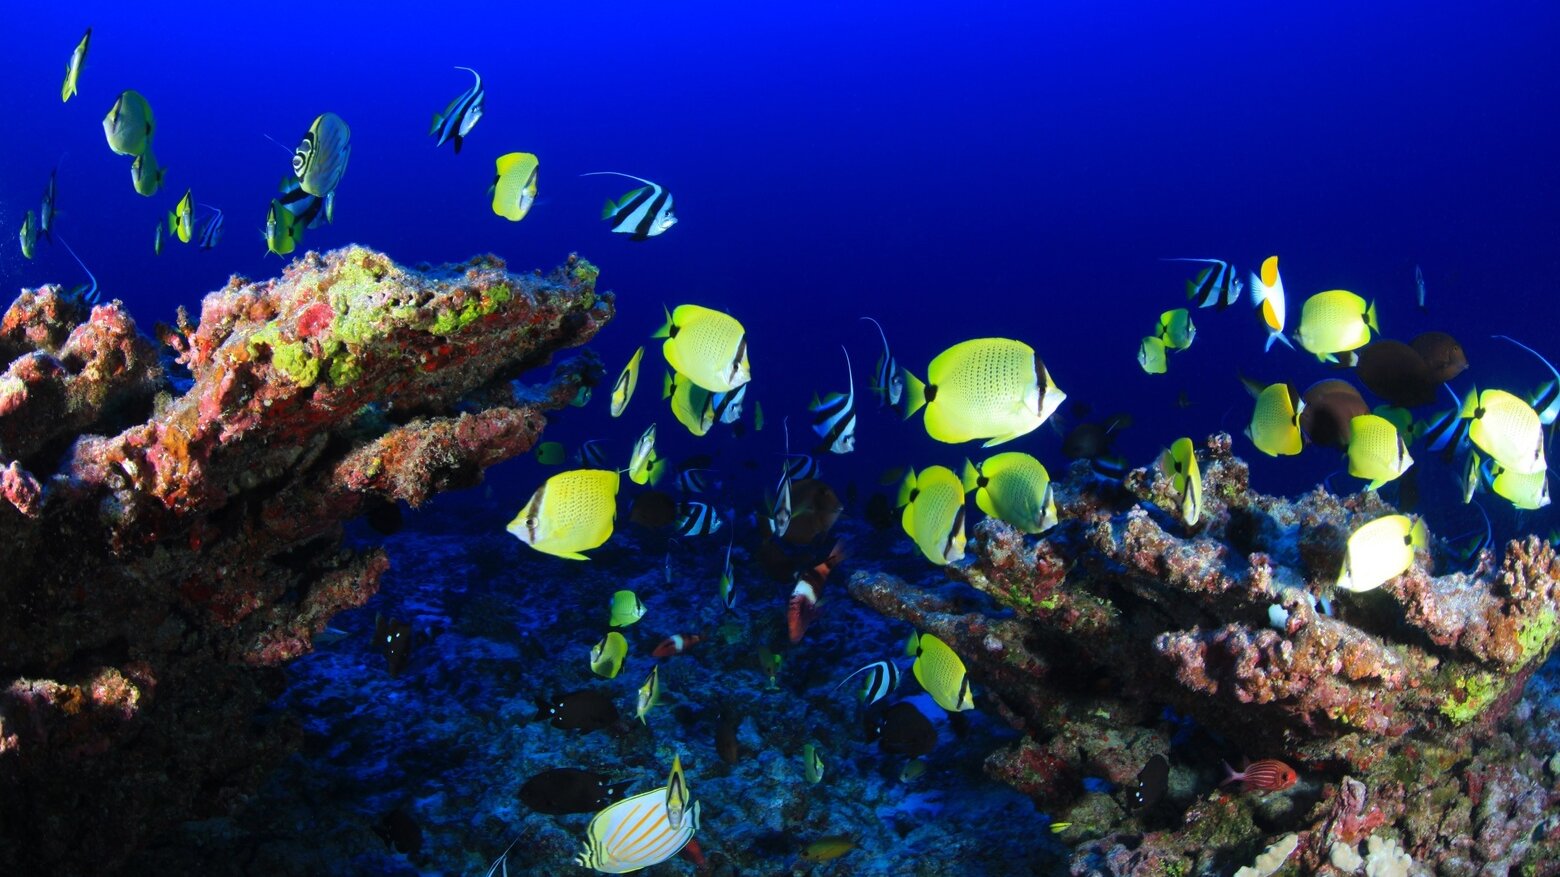 fishes in the sea. Scuba diving and snorkeling in Aqaba